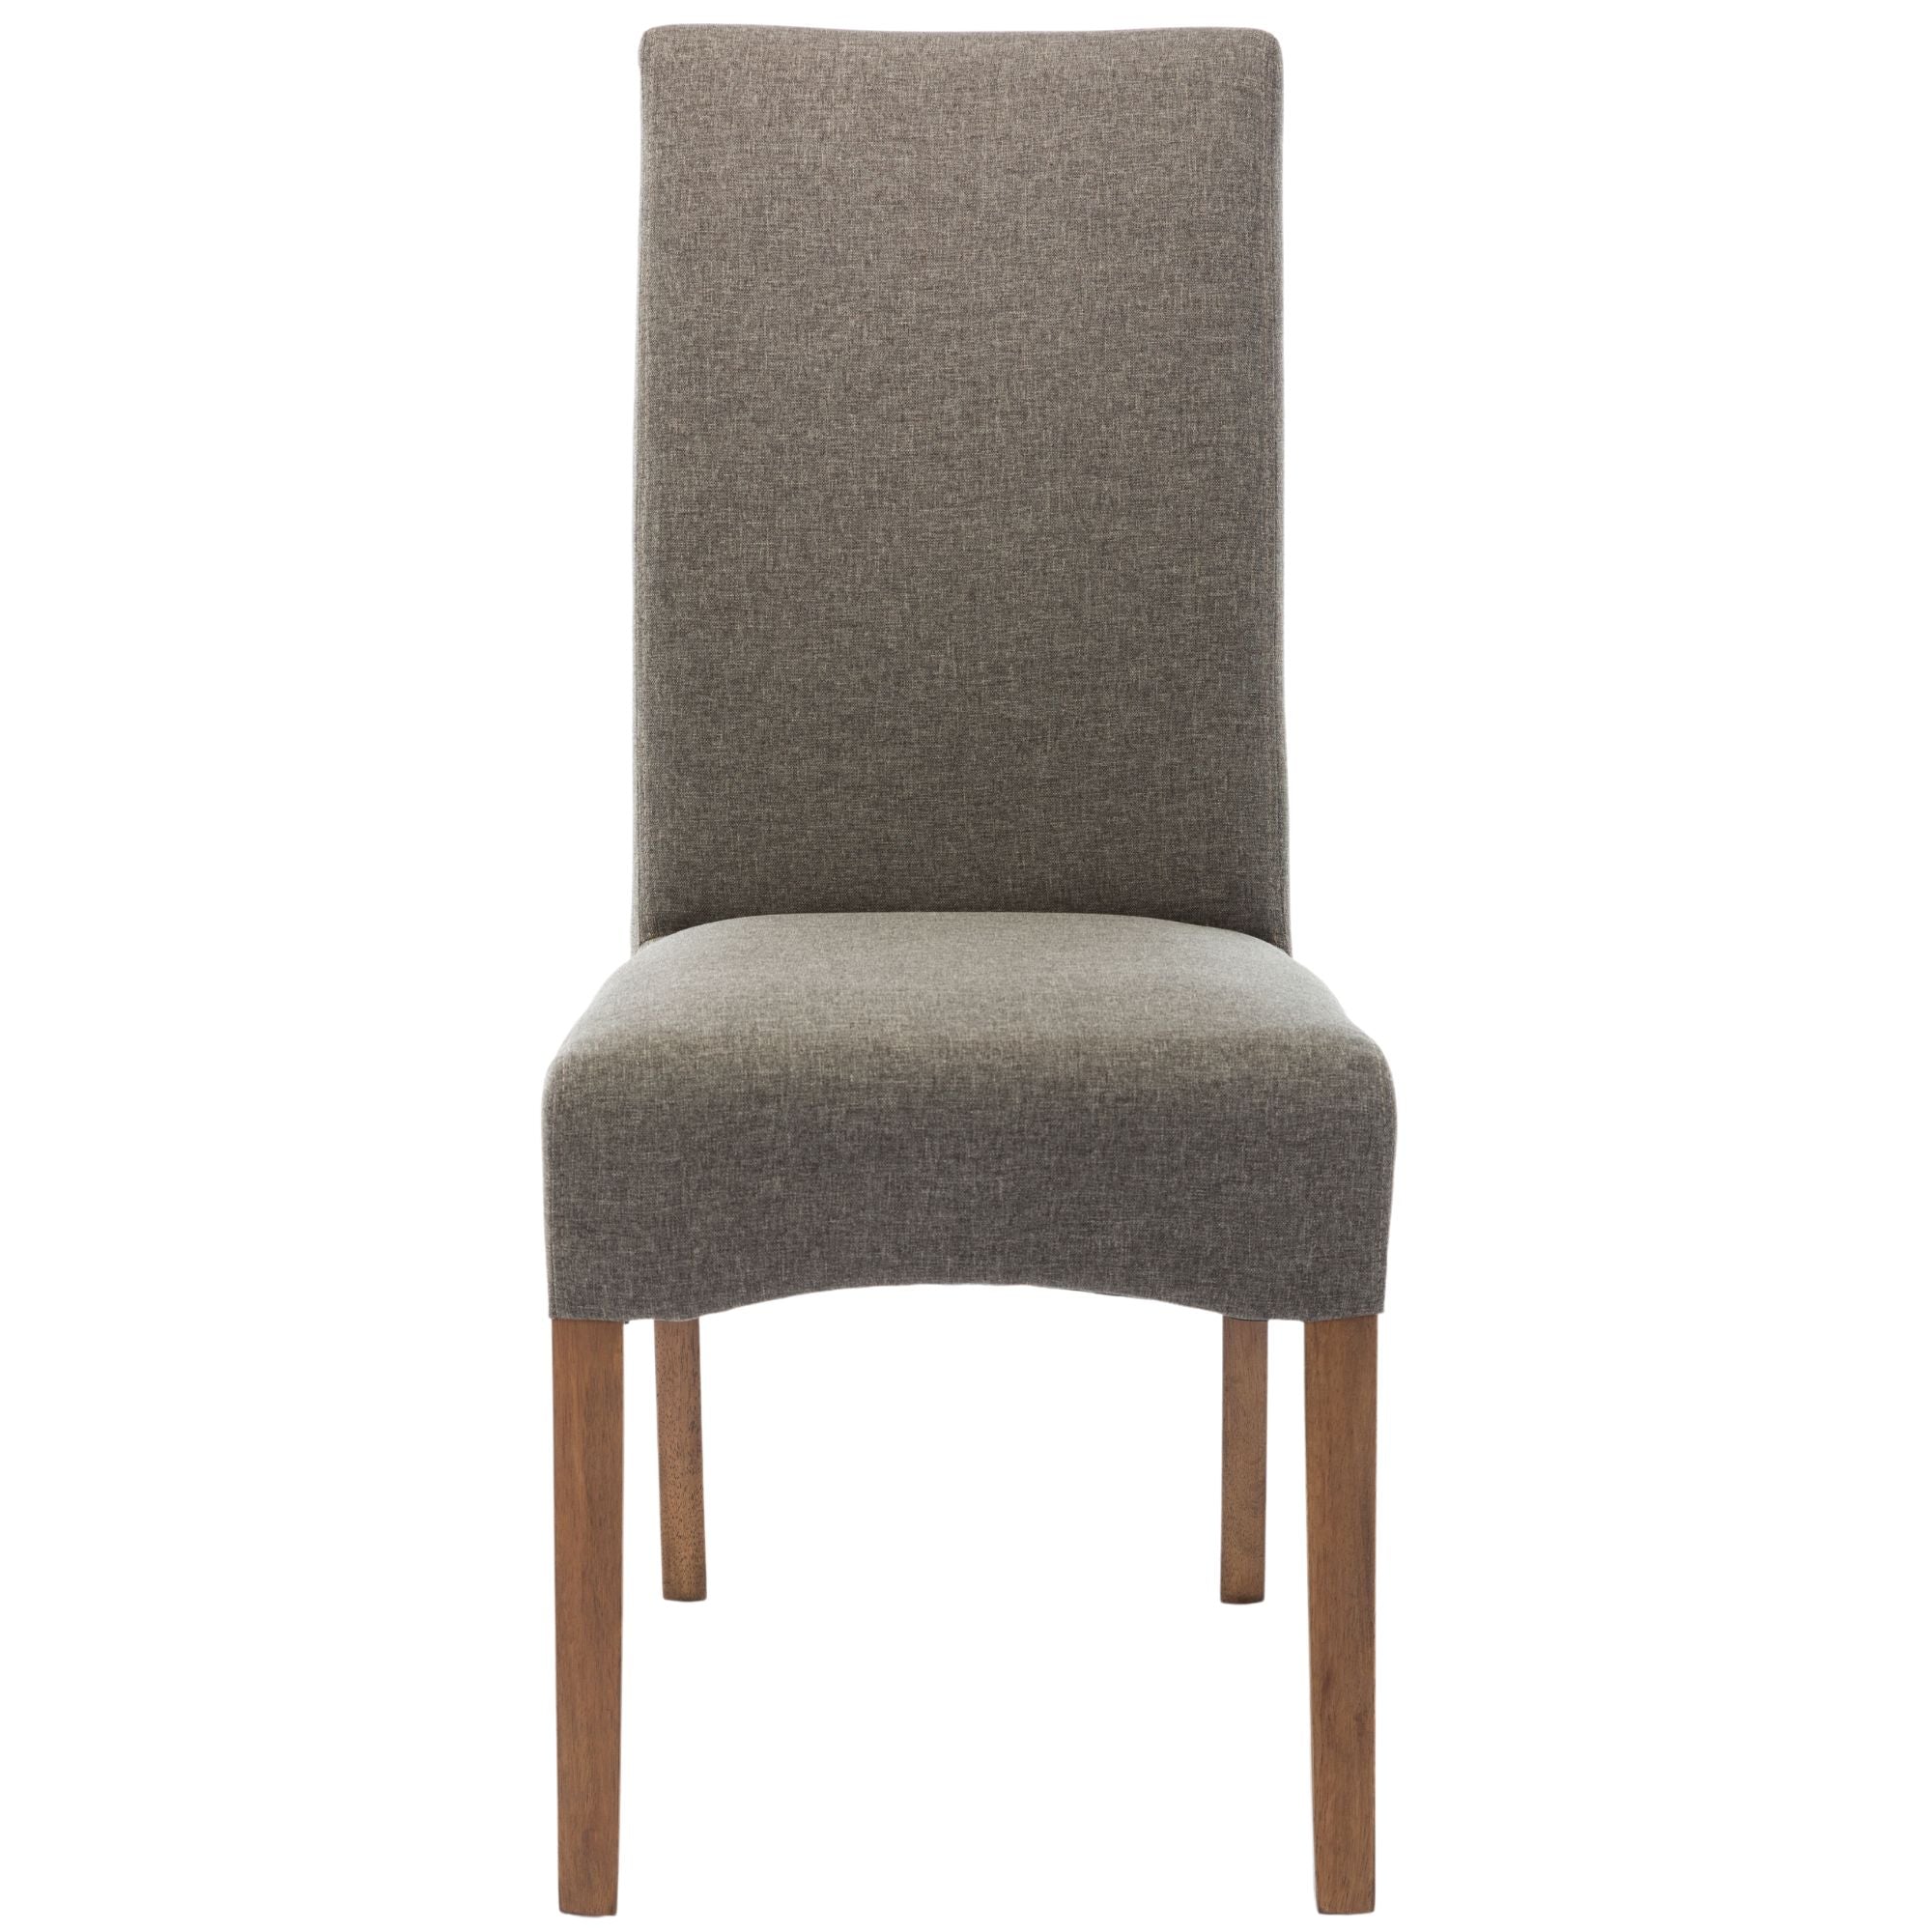 Aksa Fabric Upholstered Dining Chair Set of 2 Solid Pine Wood Furniture - Grey Deals499